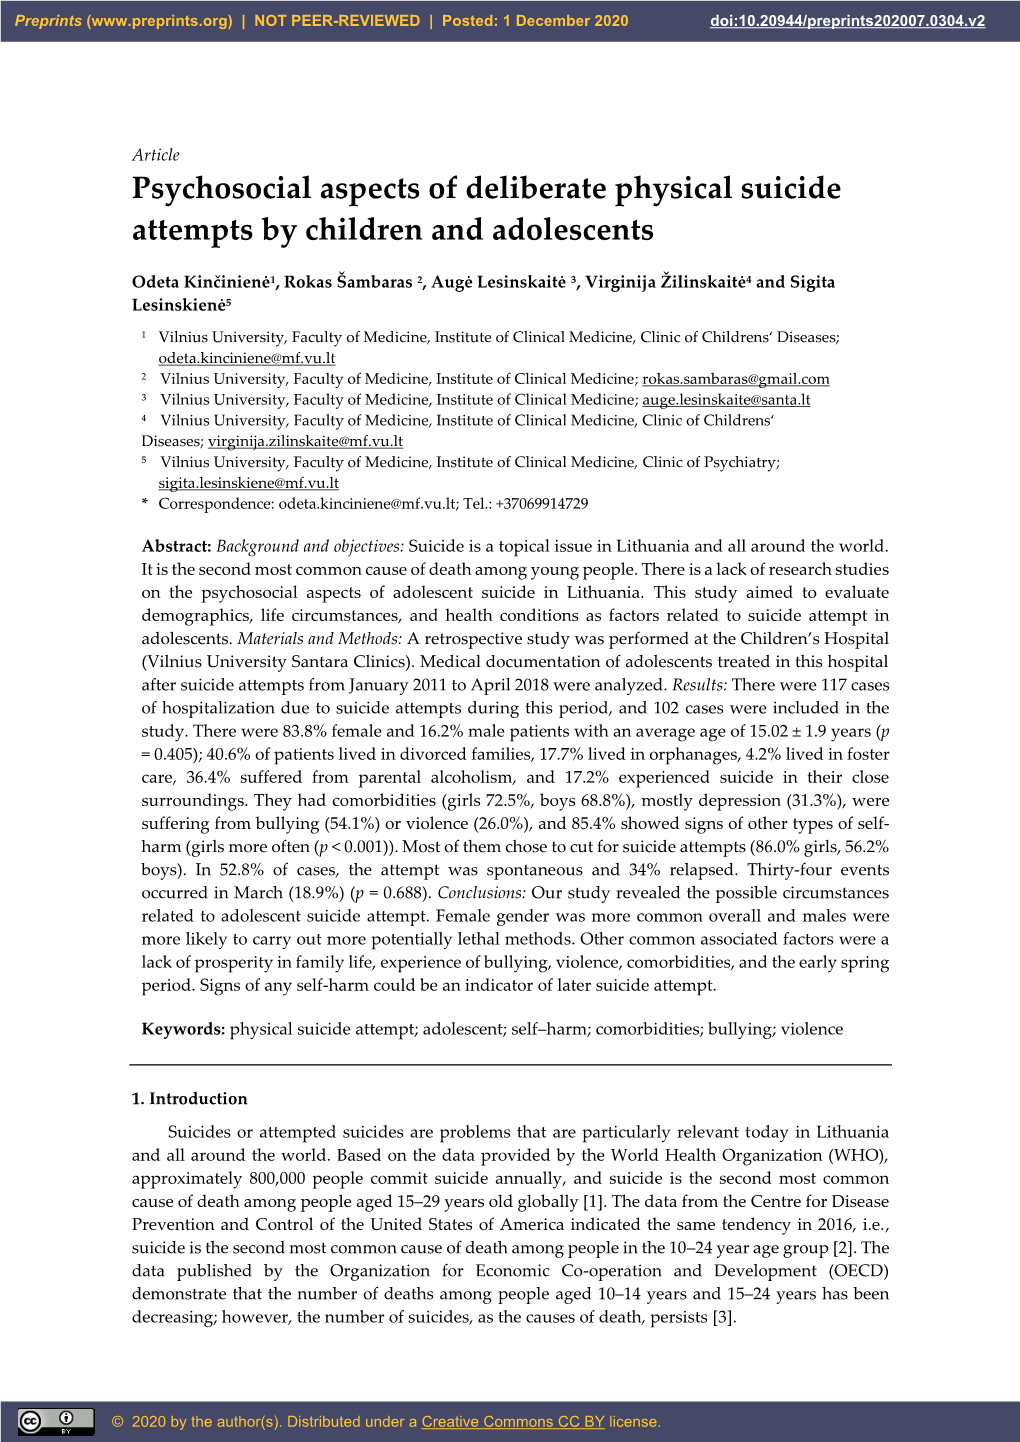 Psychosocial Aspects of Deliberate Physical Suicide Attempts by Children and Adolescents